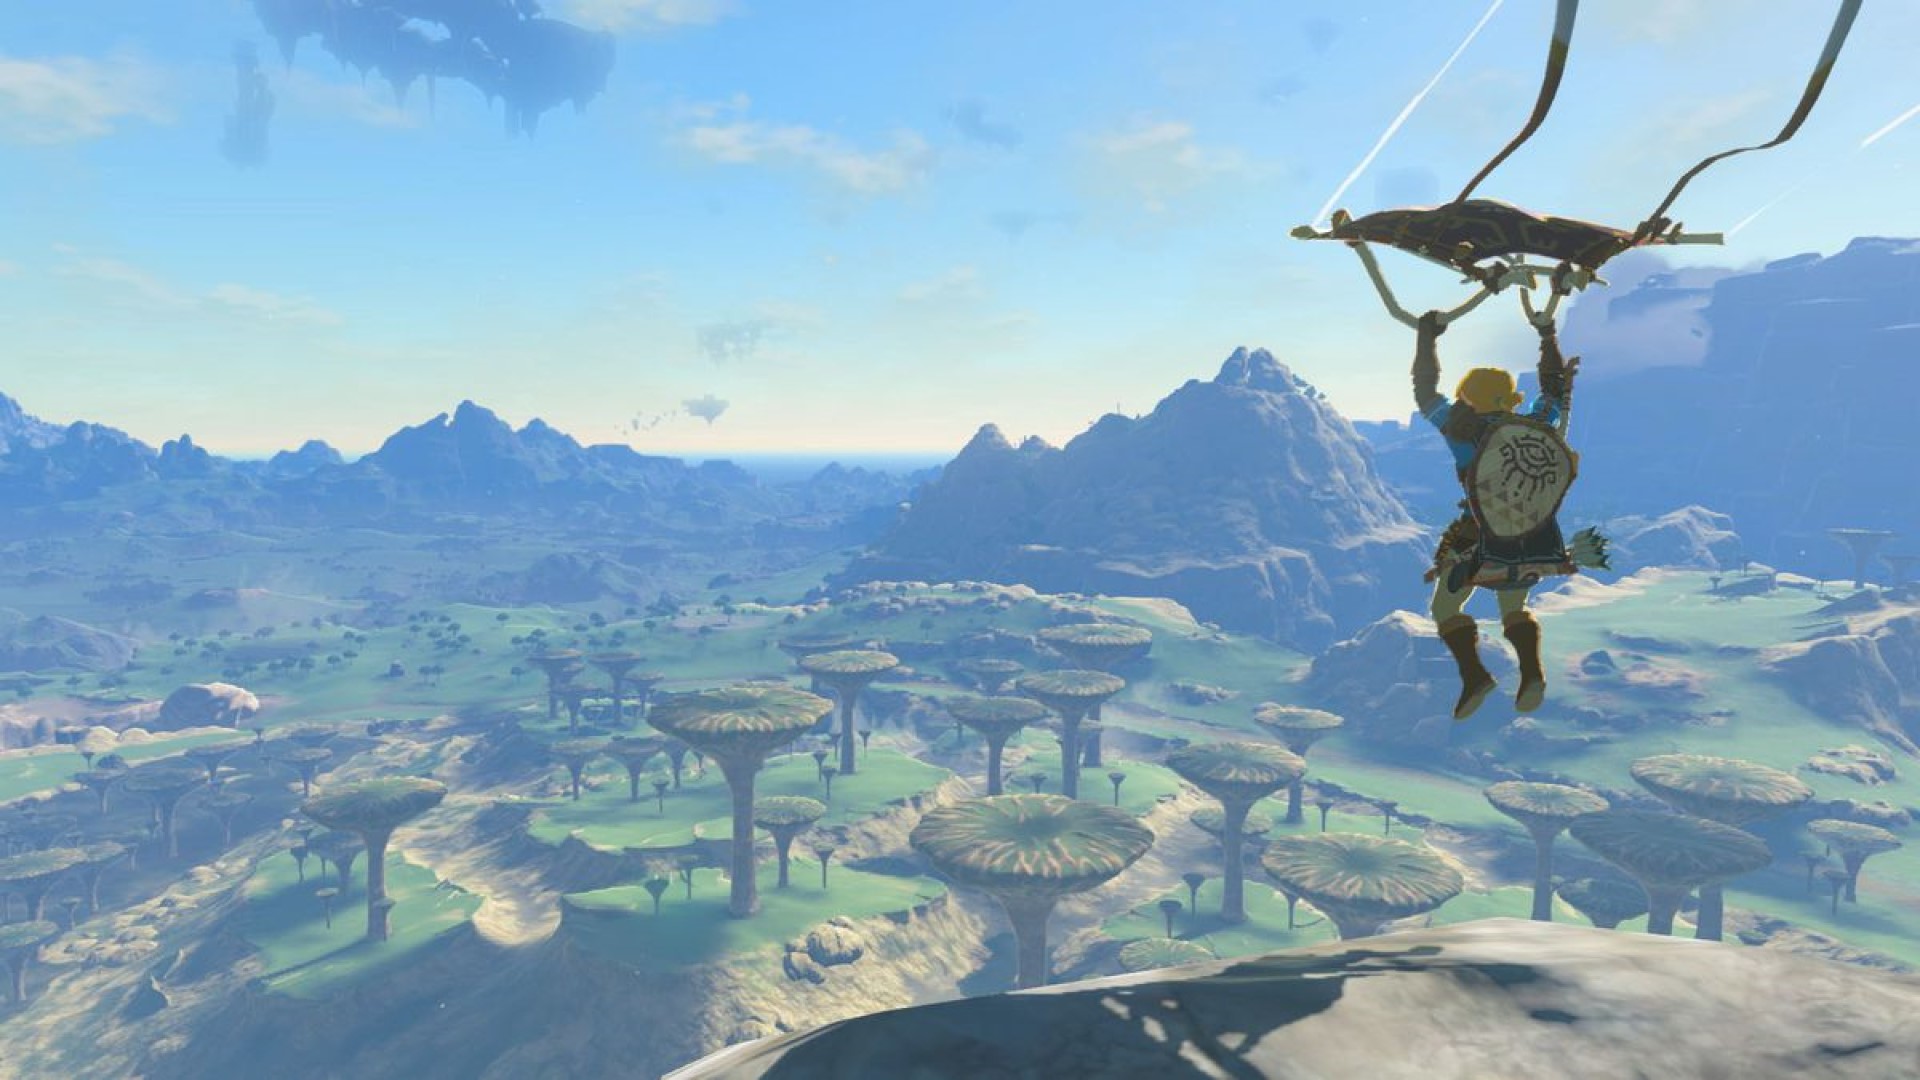 The Next Zelda Game Will be Something “Completely New,” Series Producer Says